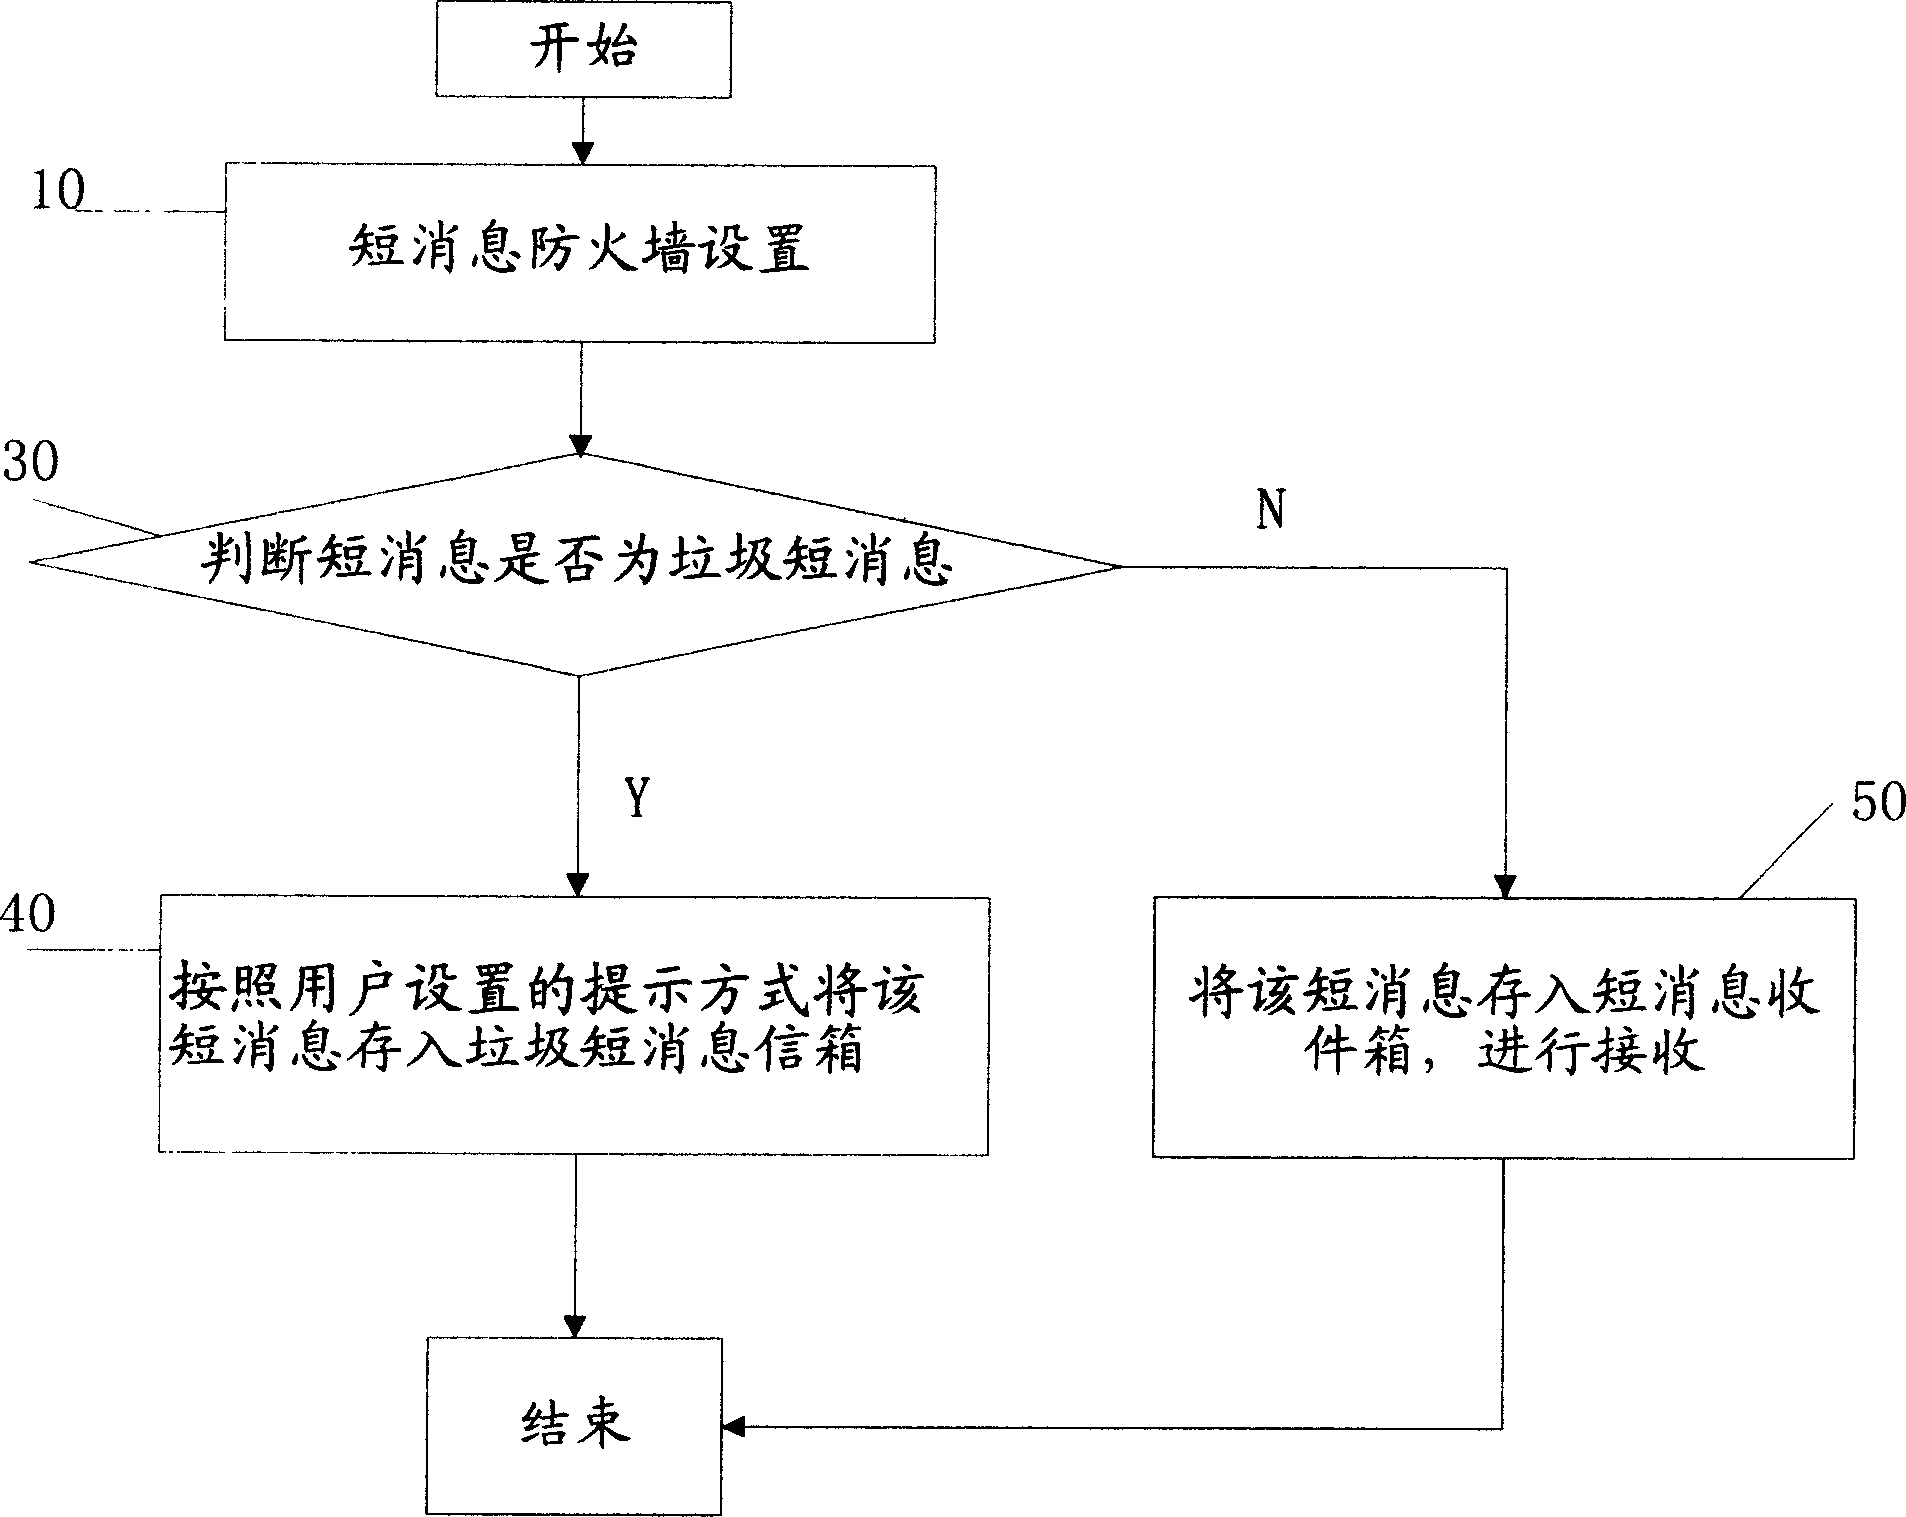 Method of realizing fireproof wall for short message